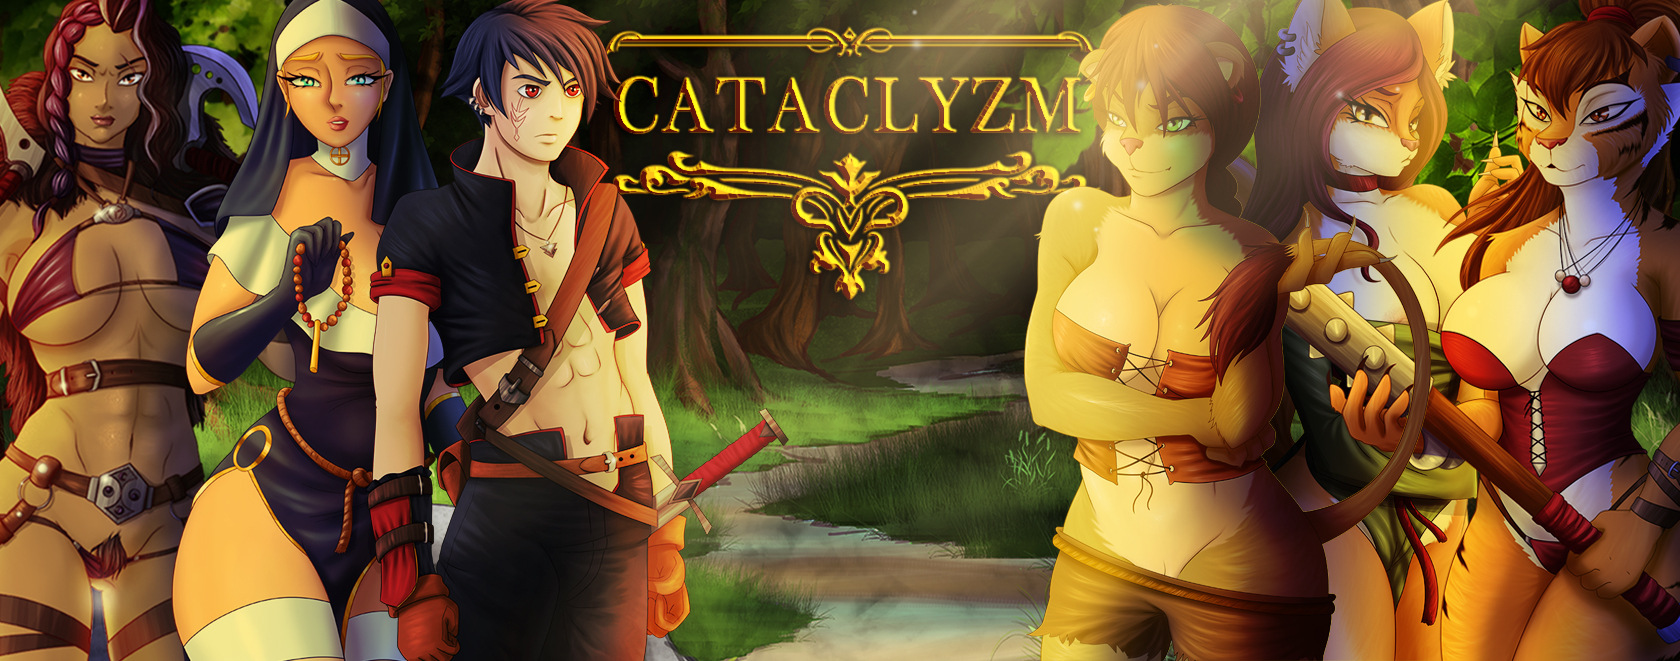 CataclyZm poster